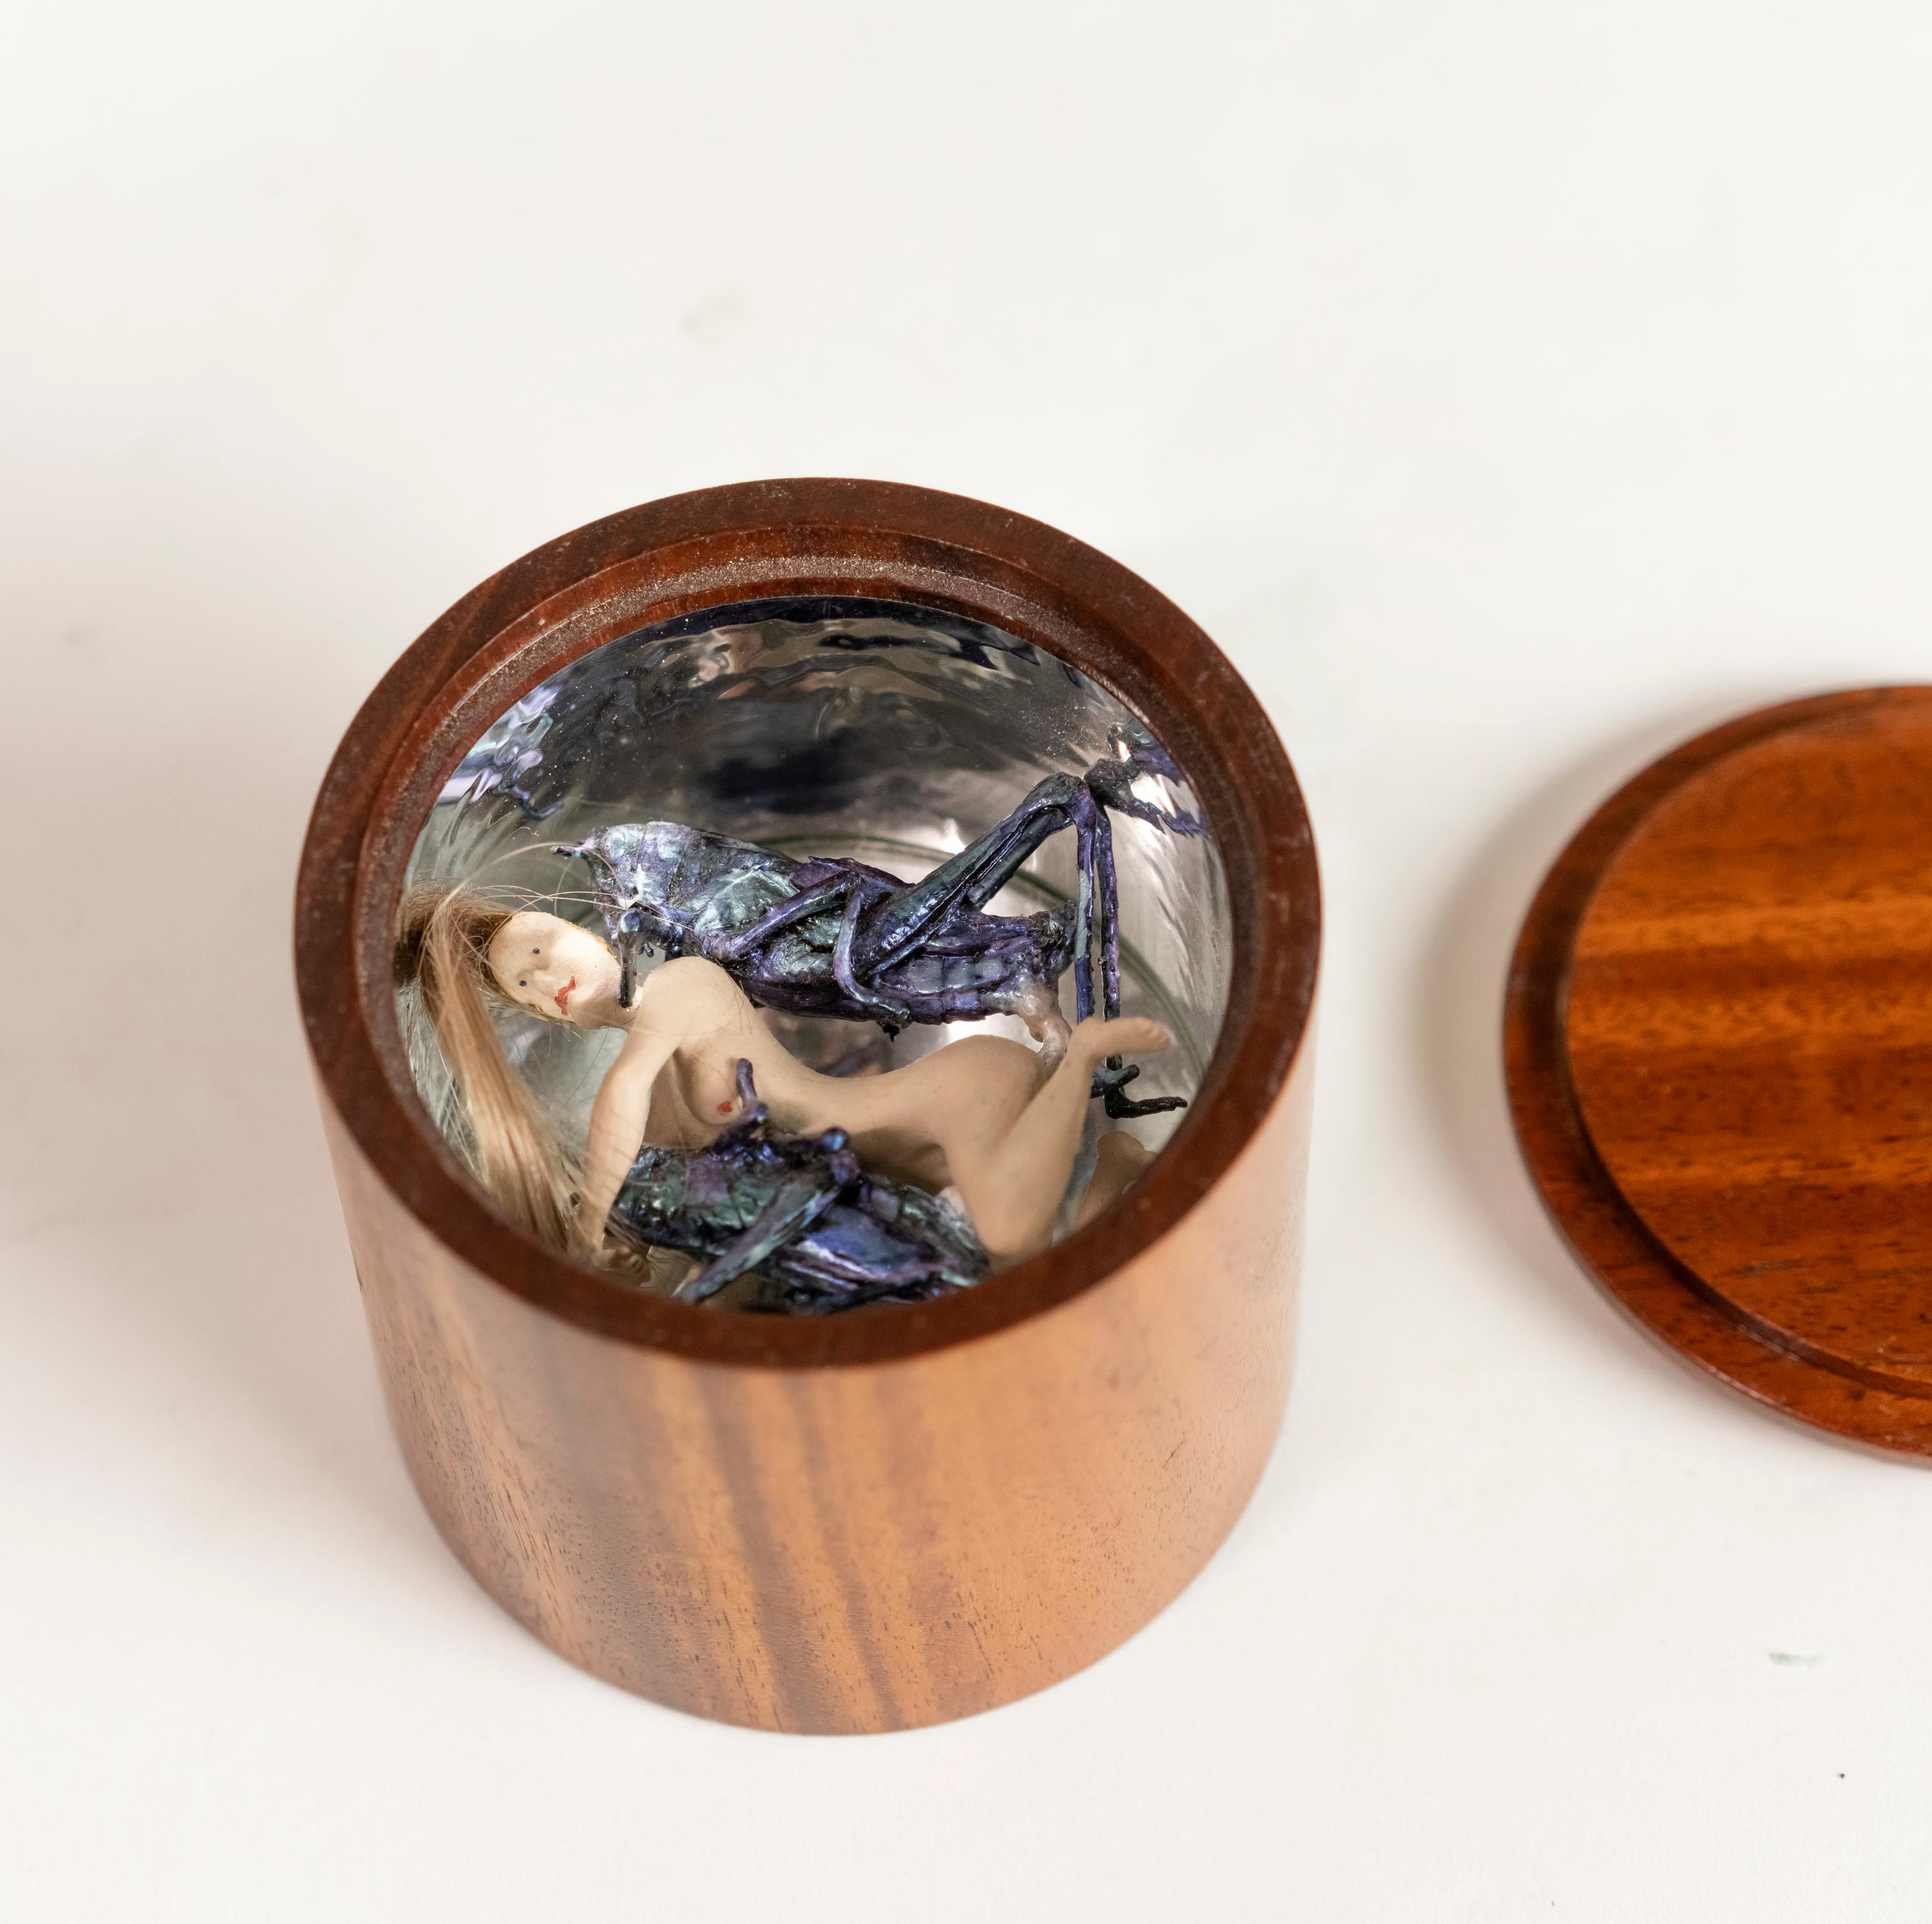 Erotic art work of a naked woman being enlaced by two crickets by Mark Prent resting in a circular walnut box with mirrored a liner signed under: 